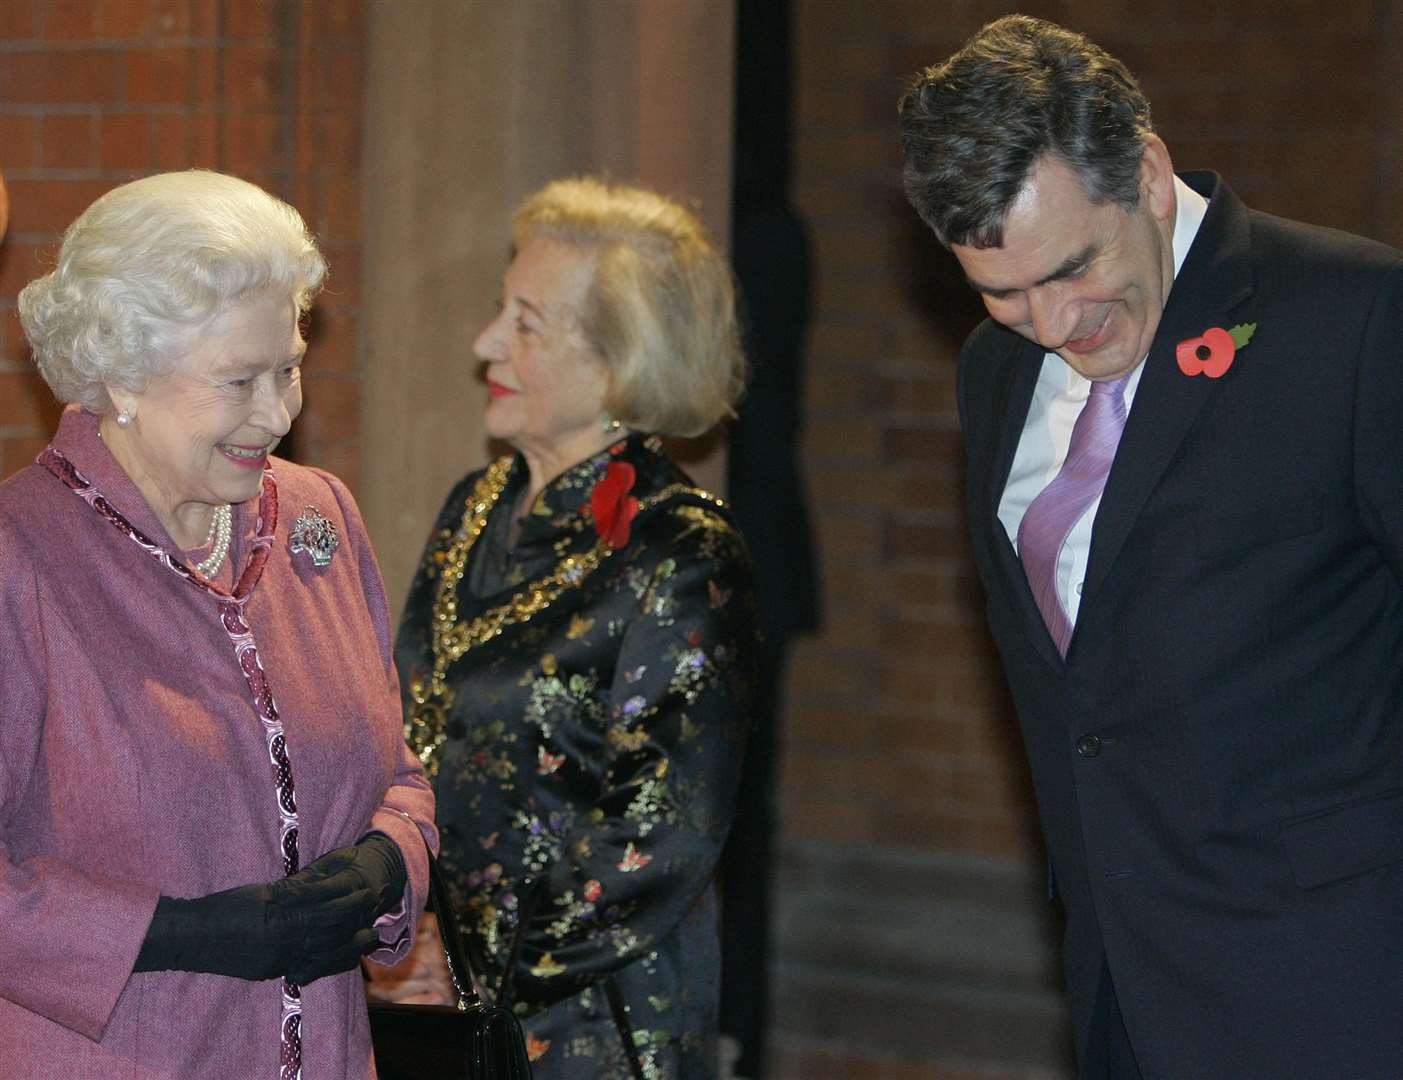 The Queen shares a joke with Gordon Brown as she opens St Pancras International station in London in 2007 (Kirsty Wigglesworth/PA)